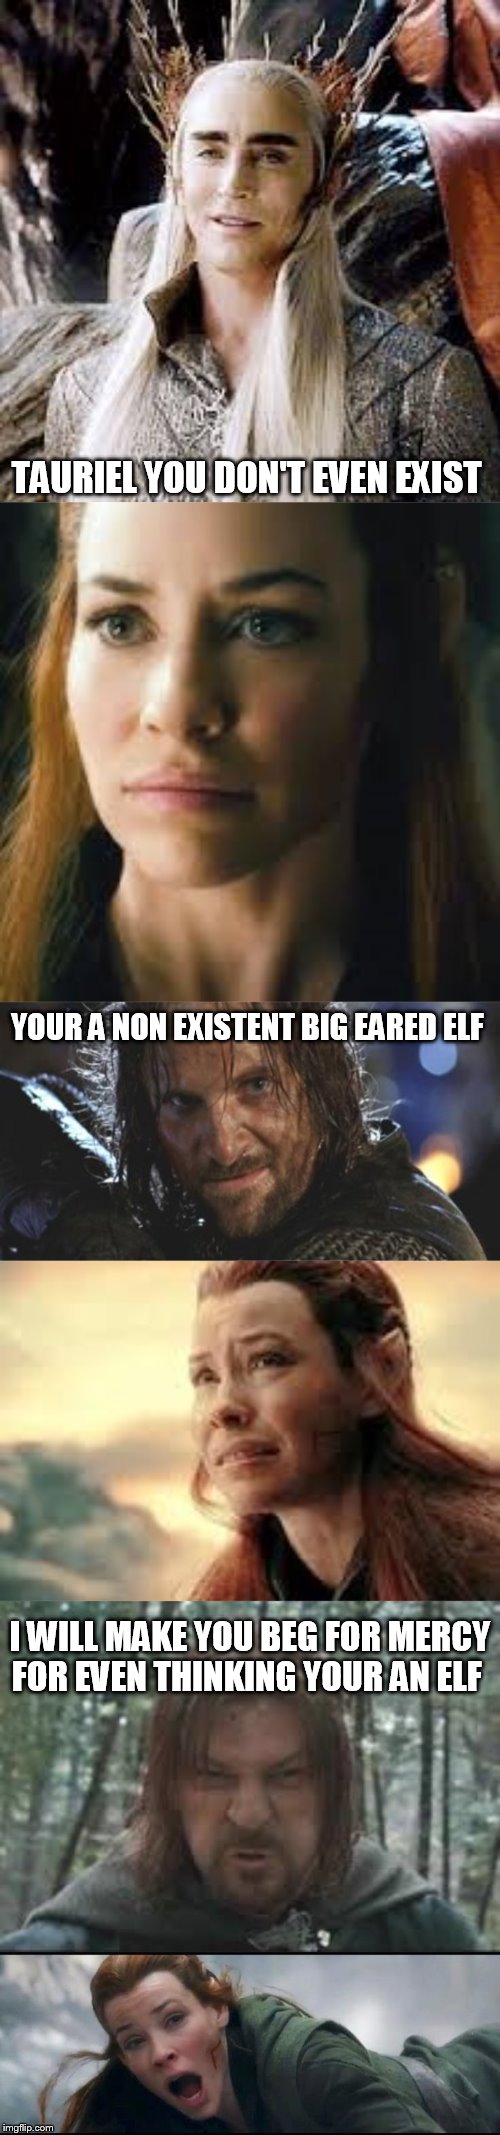 you don't even exist | TAURIEL YOU DON'T EVEN EXIST I WILL MAKE YOU BEG FOR MERCY FOR EVEN THINKING YOUR AN ELF YOUR A NON EXISTENT BIG EARED ELF | image tagged in the hobbit,the lord of the rings | made w/ Imgflip meme maker